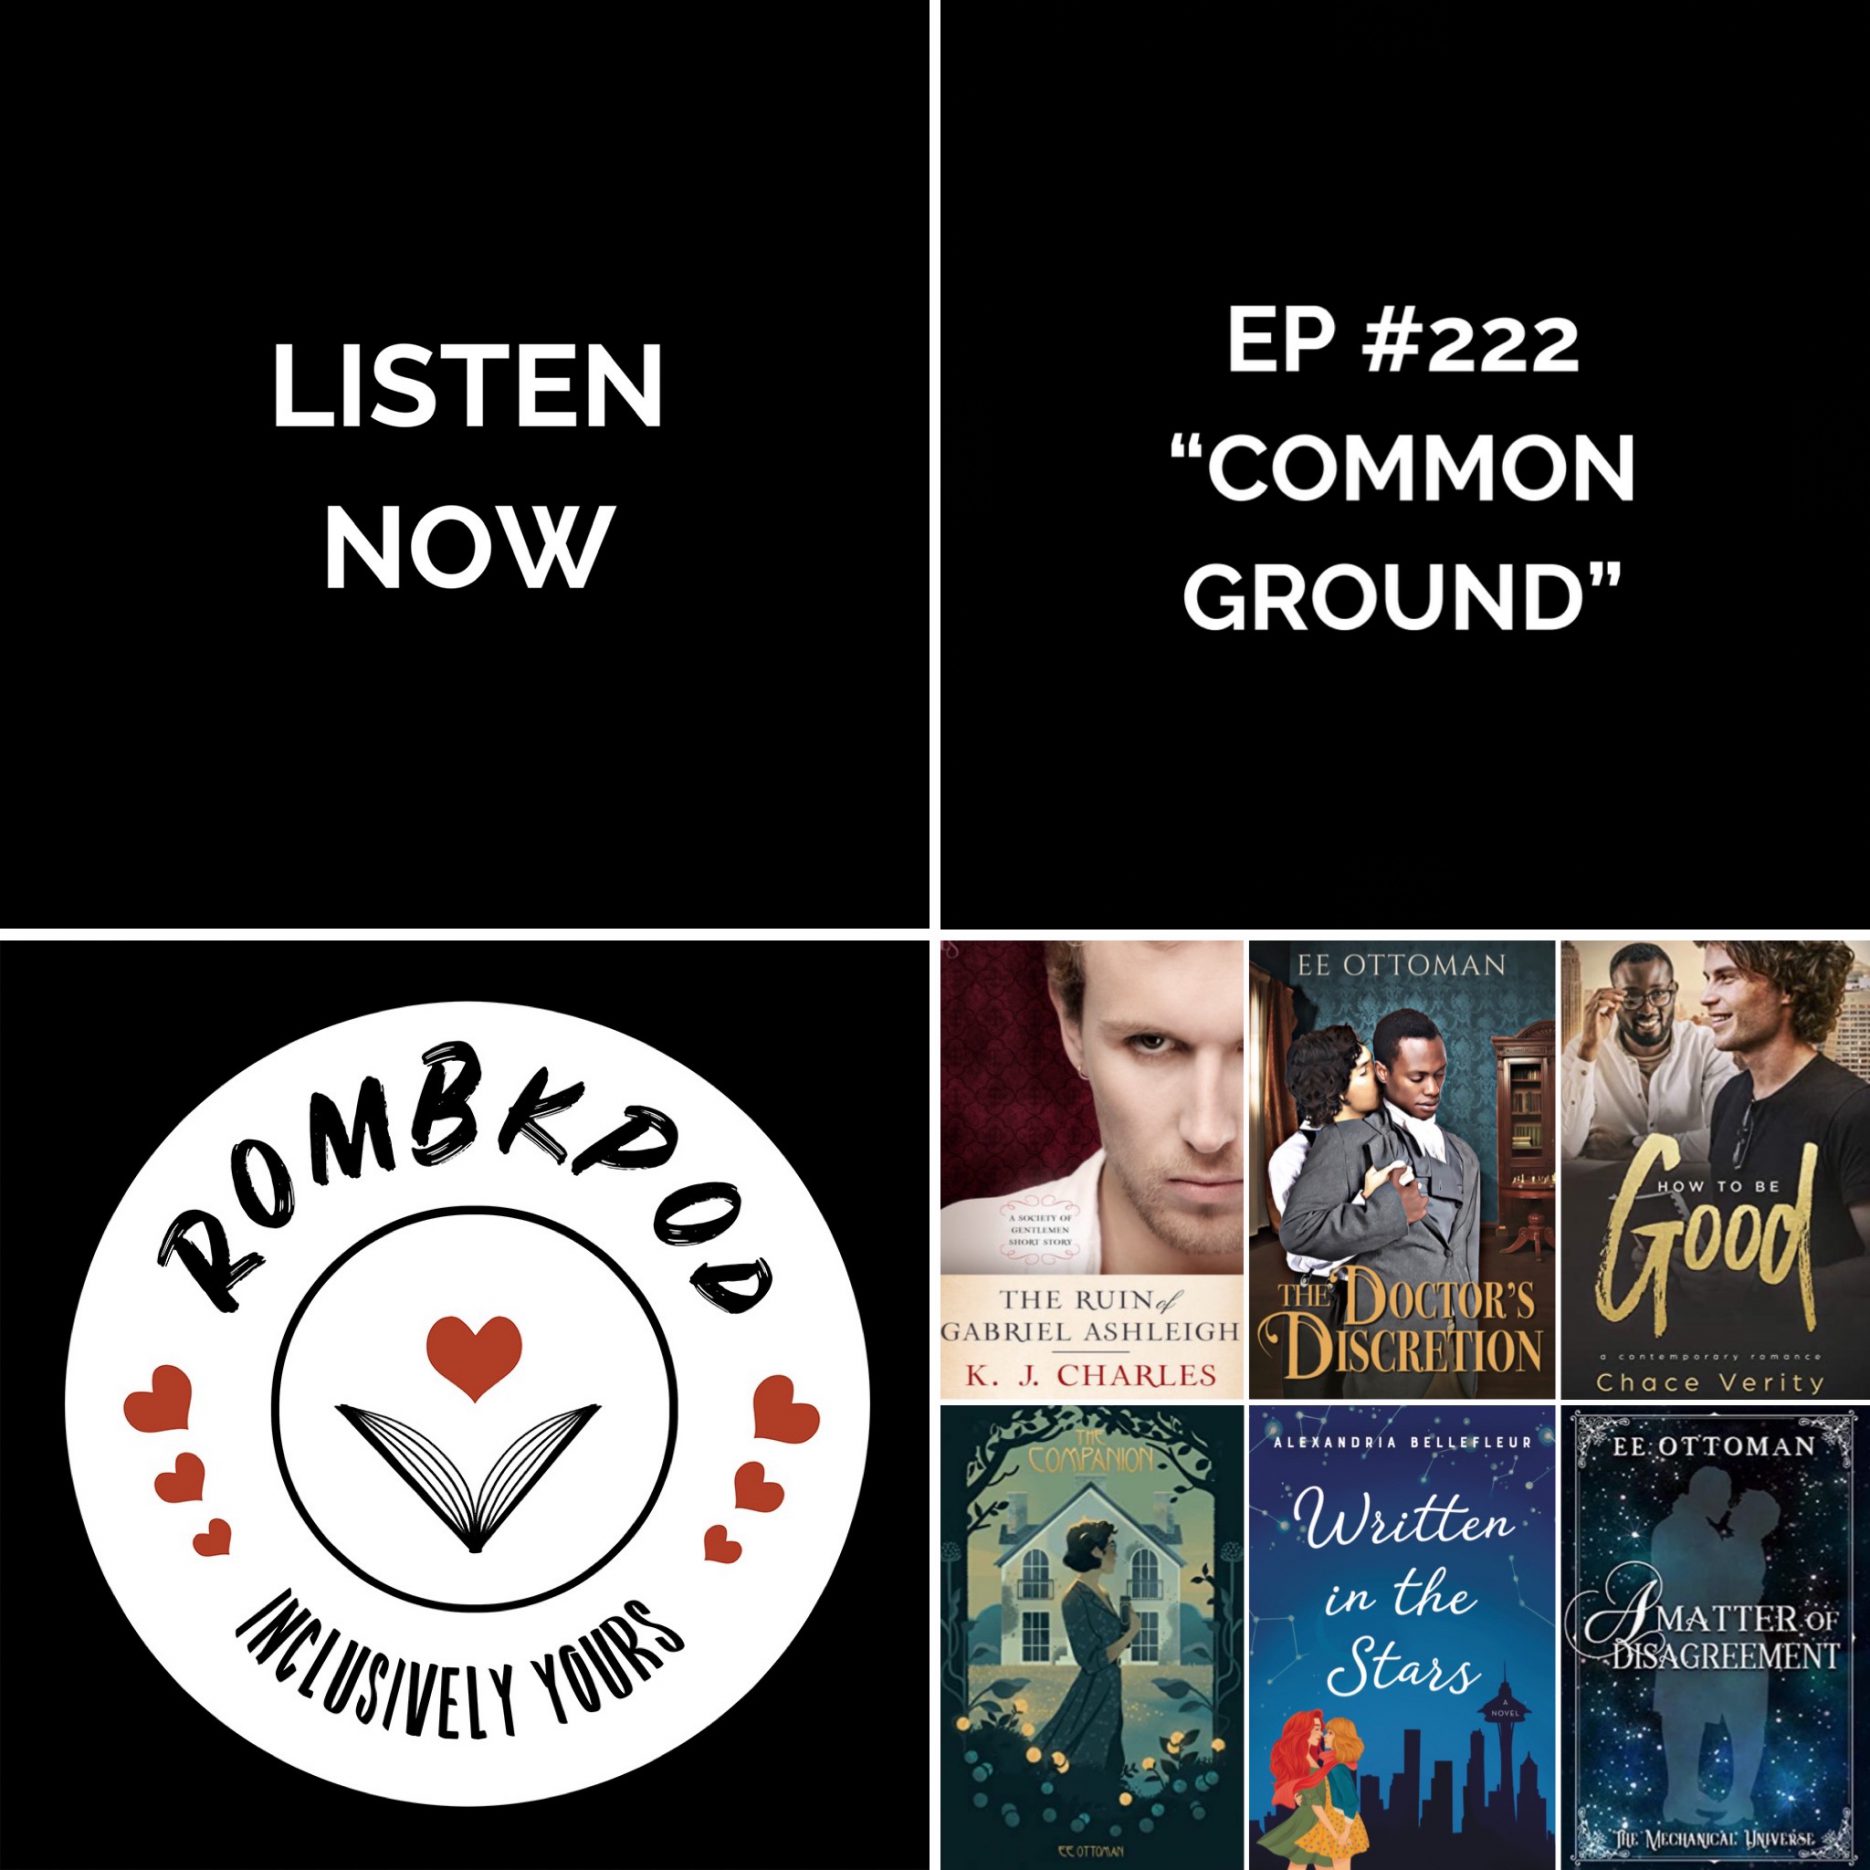 IMAGE: lower left corner, RomBkPod heart logo; lower right corner, ep #222 book cover collage; IMAGE TEXT: Listen Now, ep #222 "Common Ground"